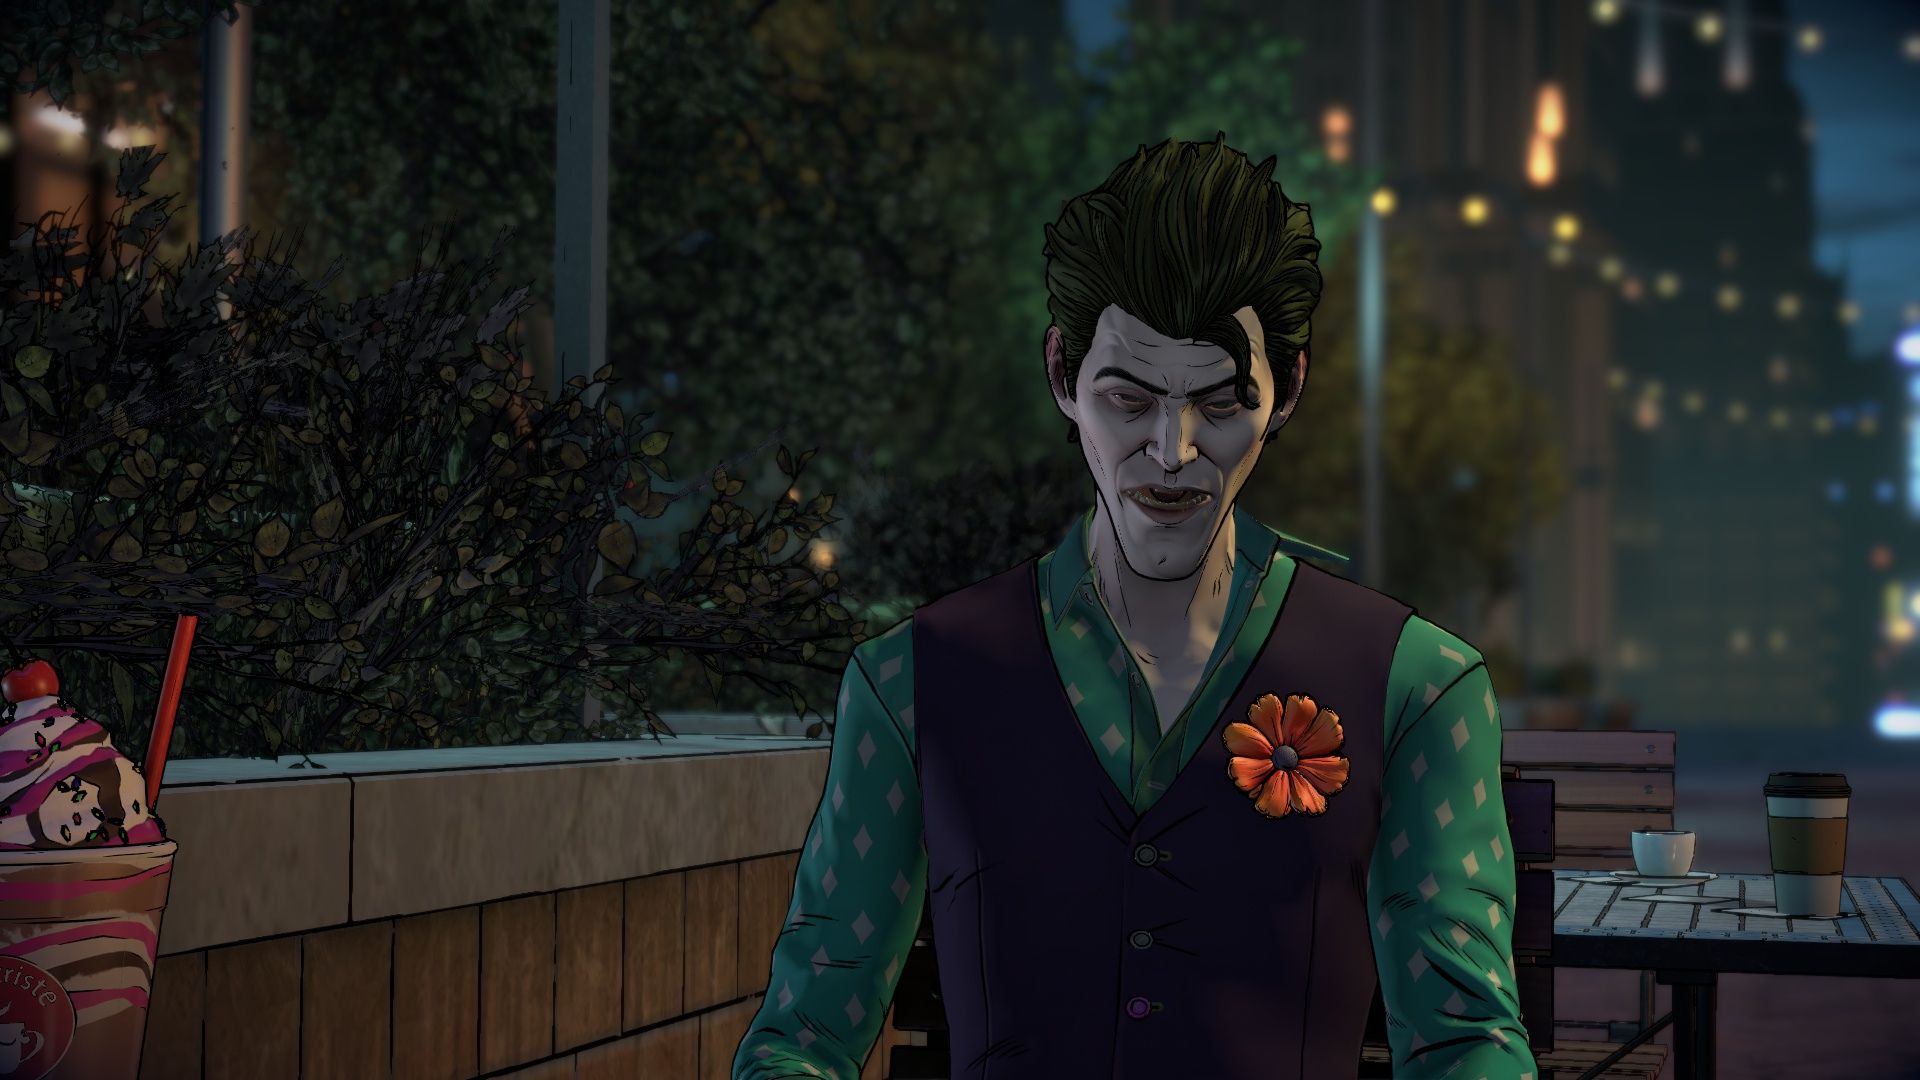 Batman games - the Joker, a man with short hair, green shirt, purple vest with flower in the pocket, outside looking forlorn.